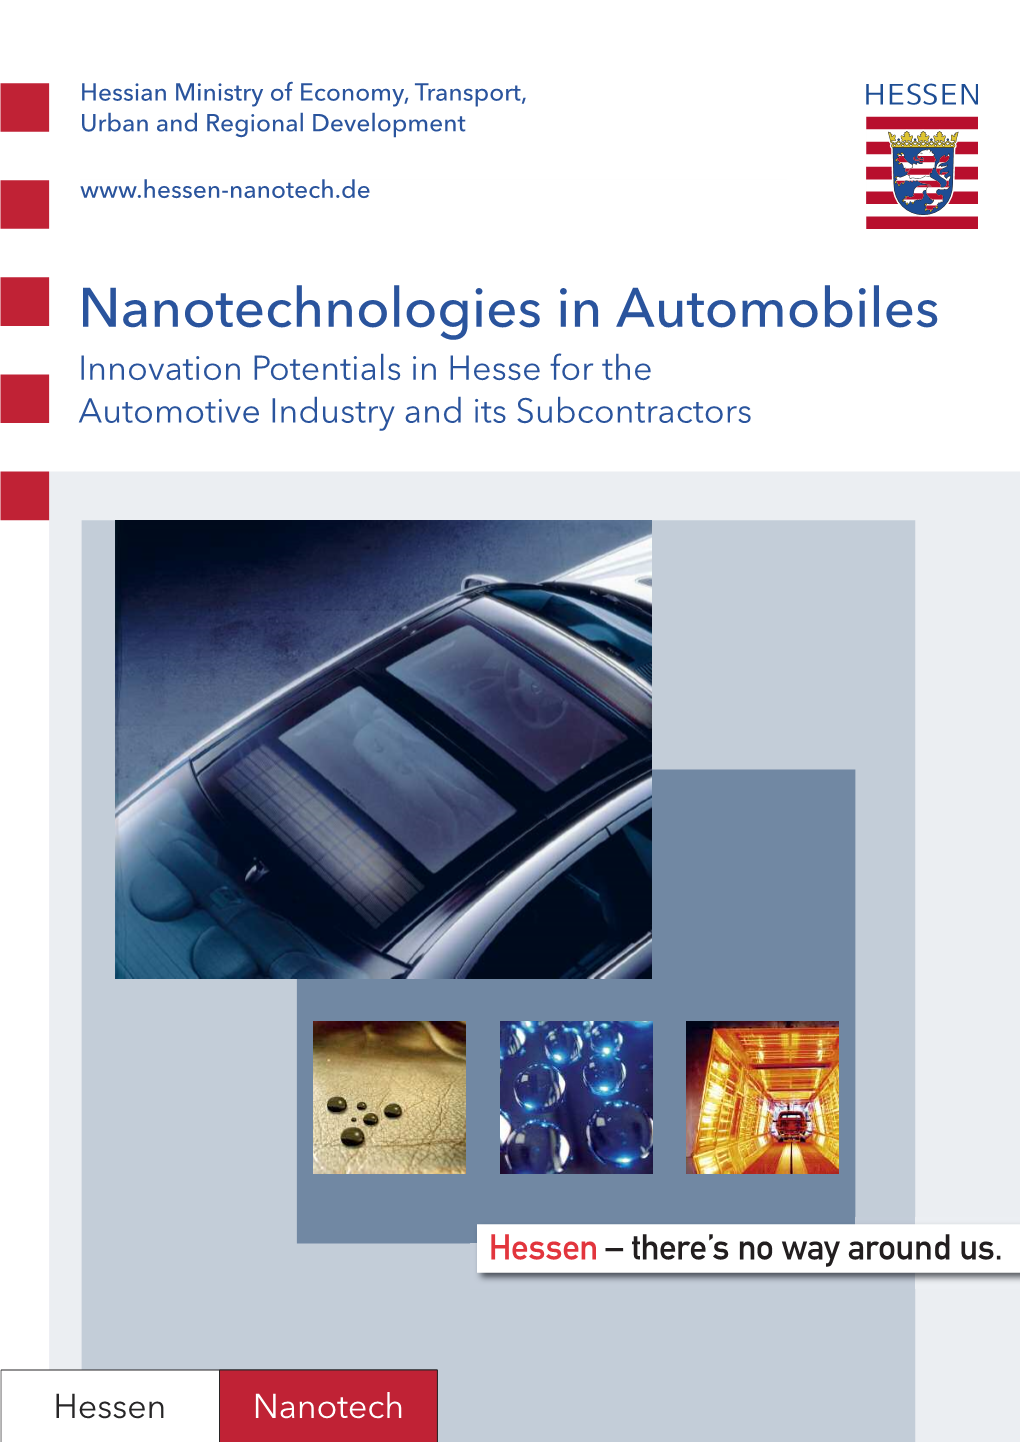 Nanotechnologies in Automobiles Innovation Potentials in Hesse for the Automotive Industry and Its Subcontractors